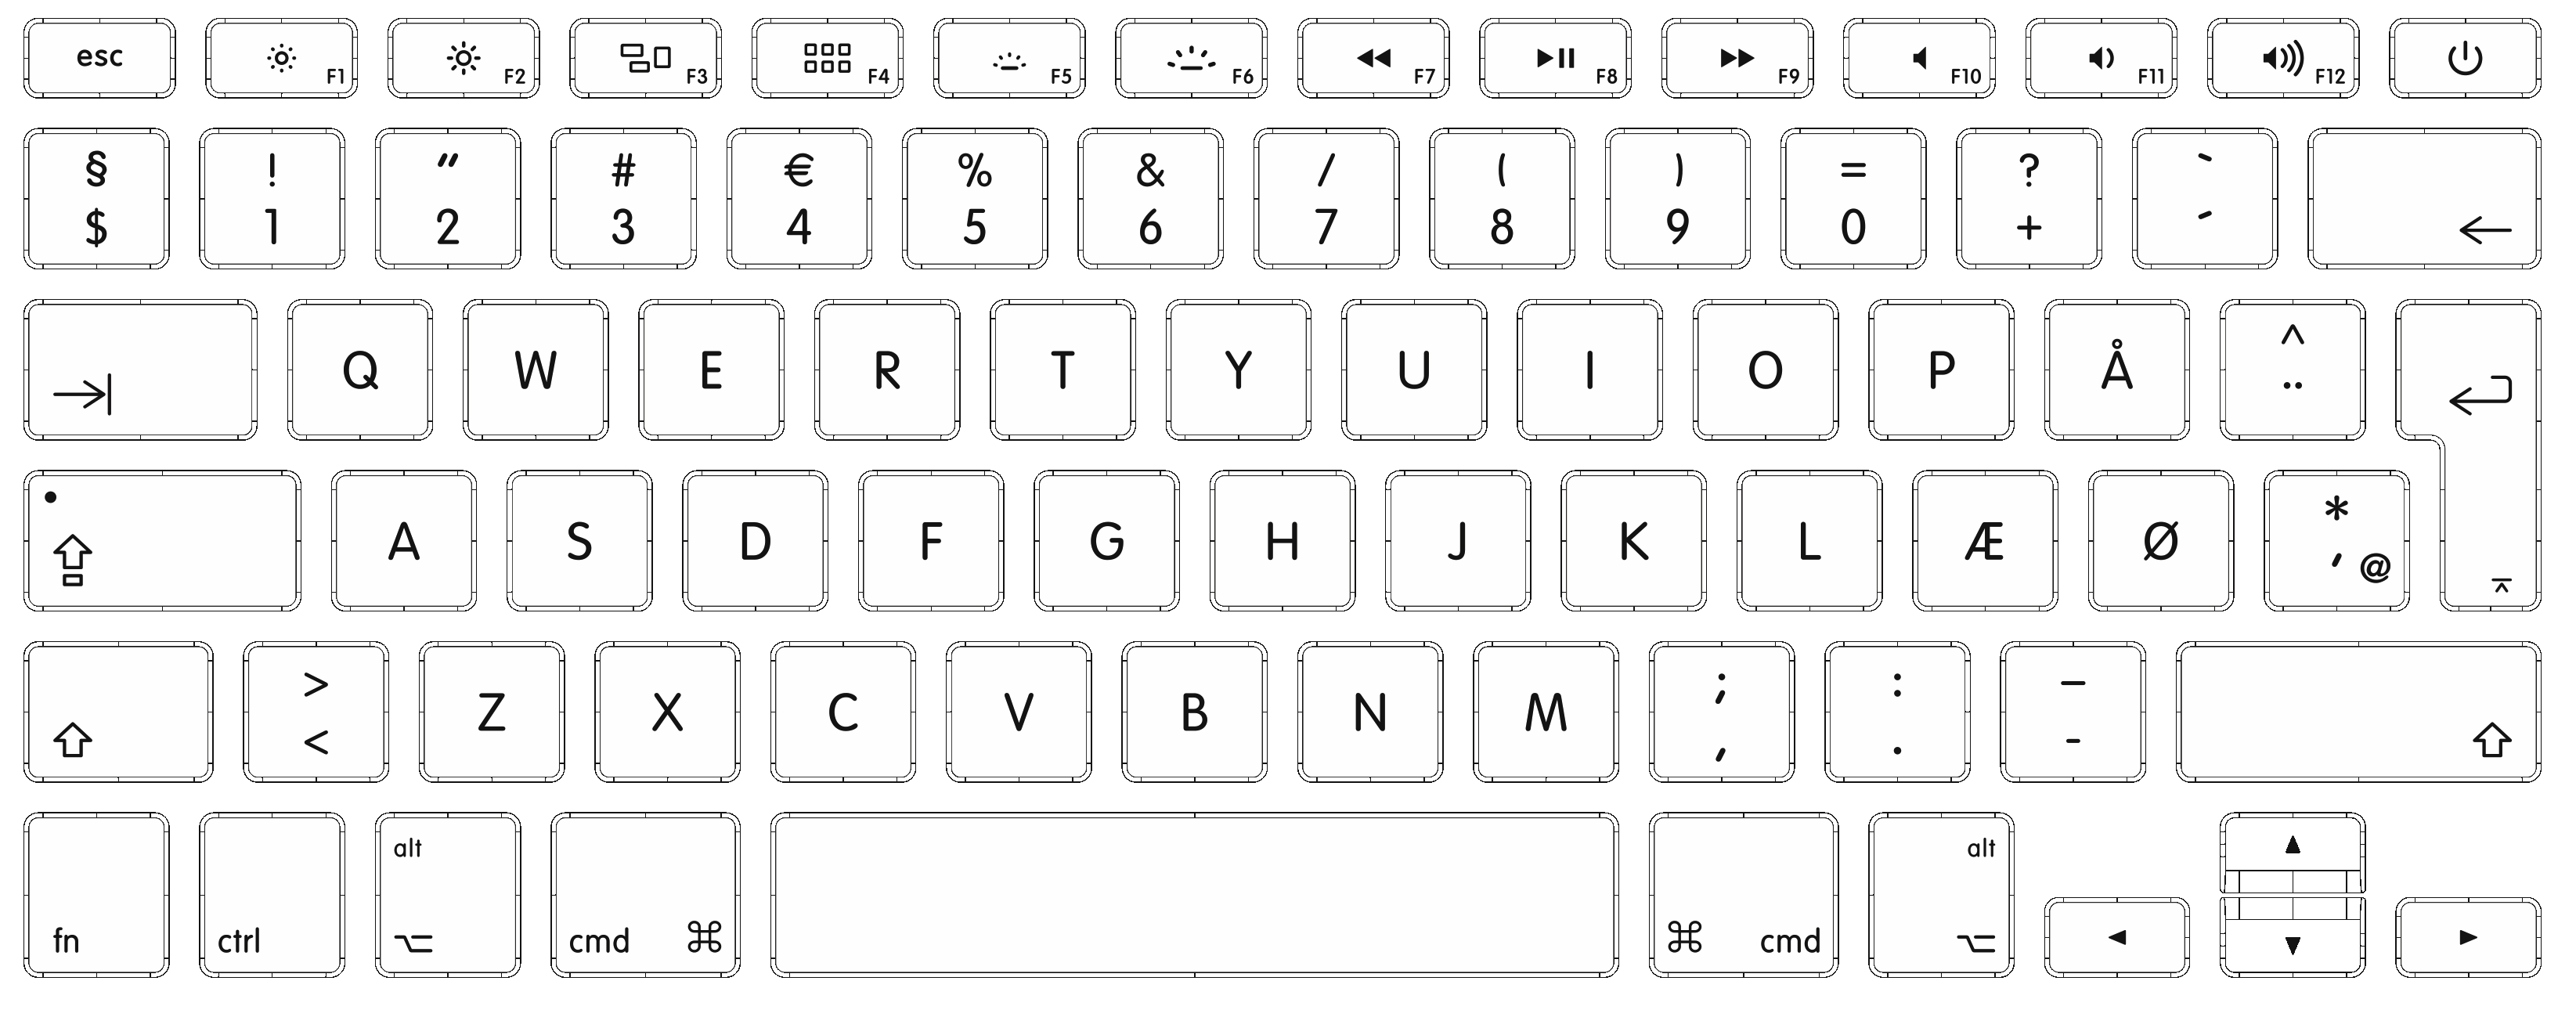 keypad with letters